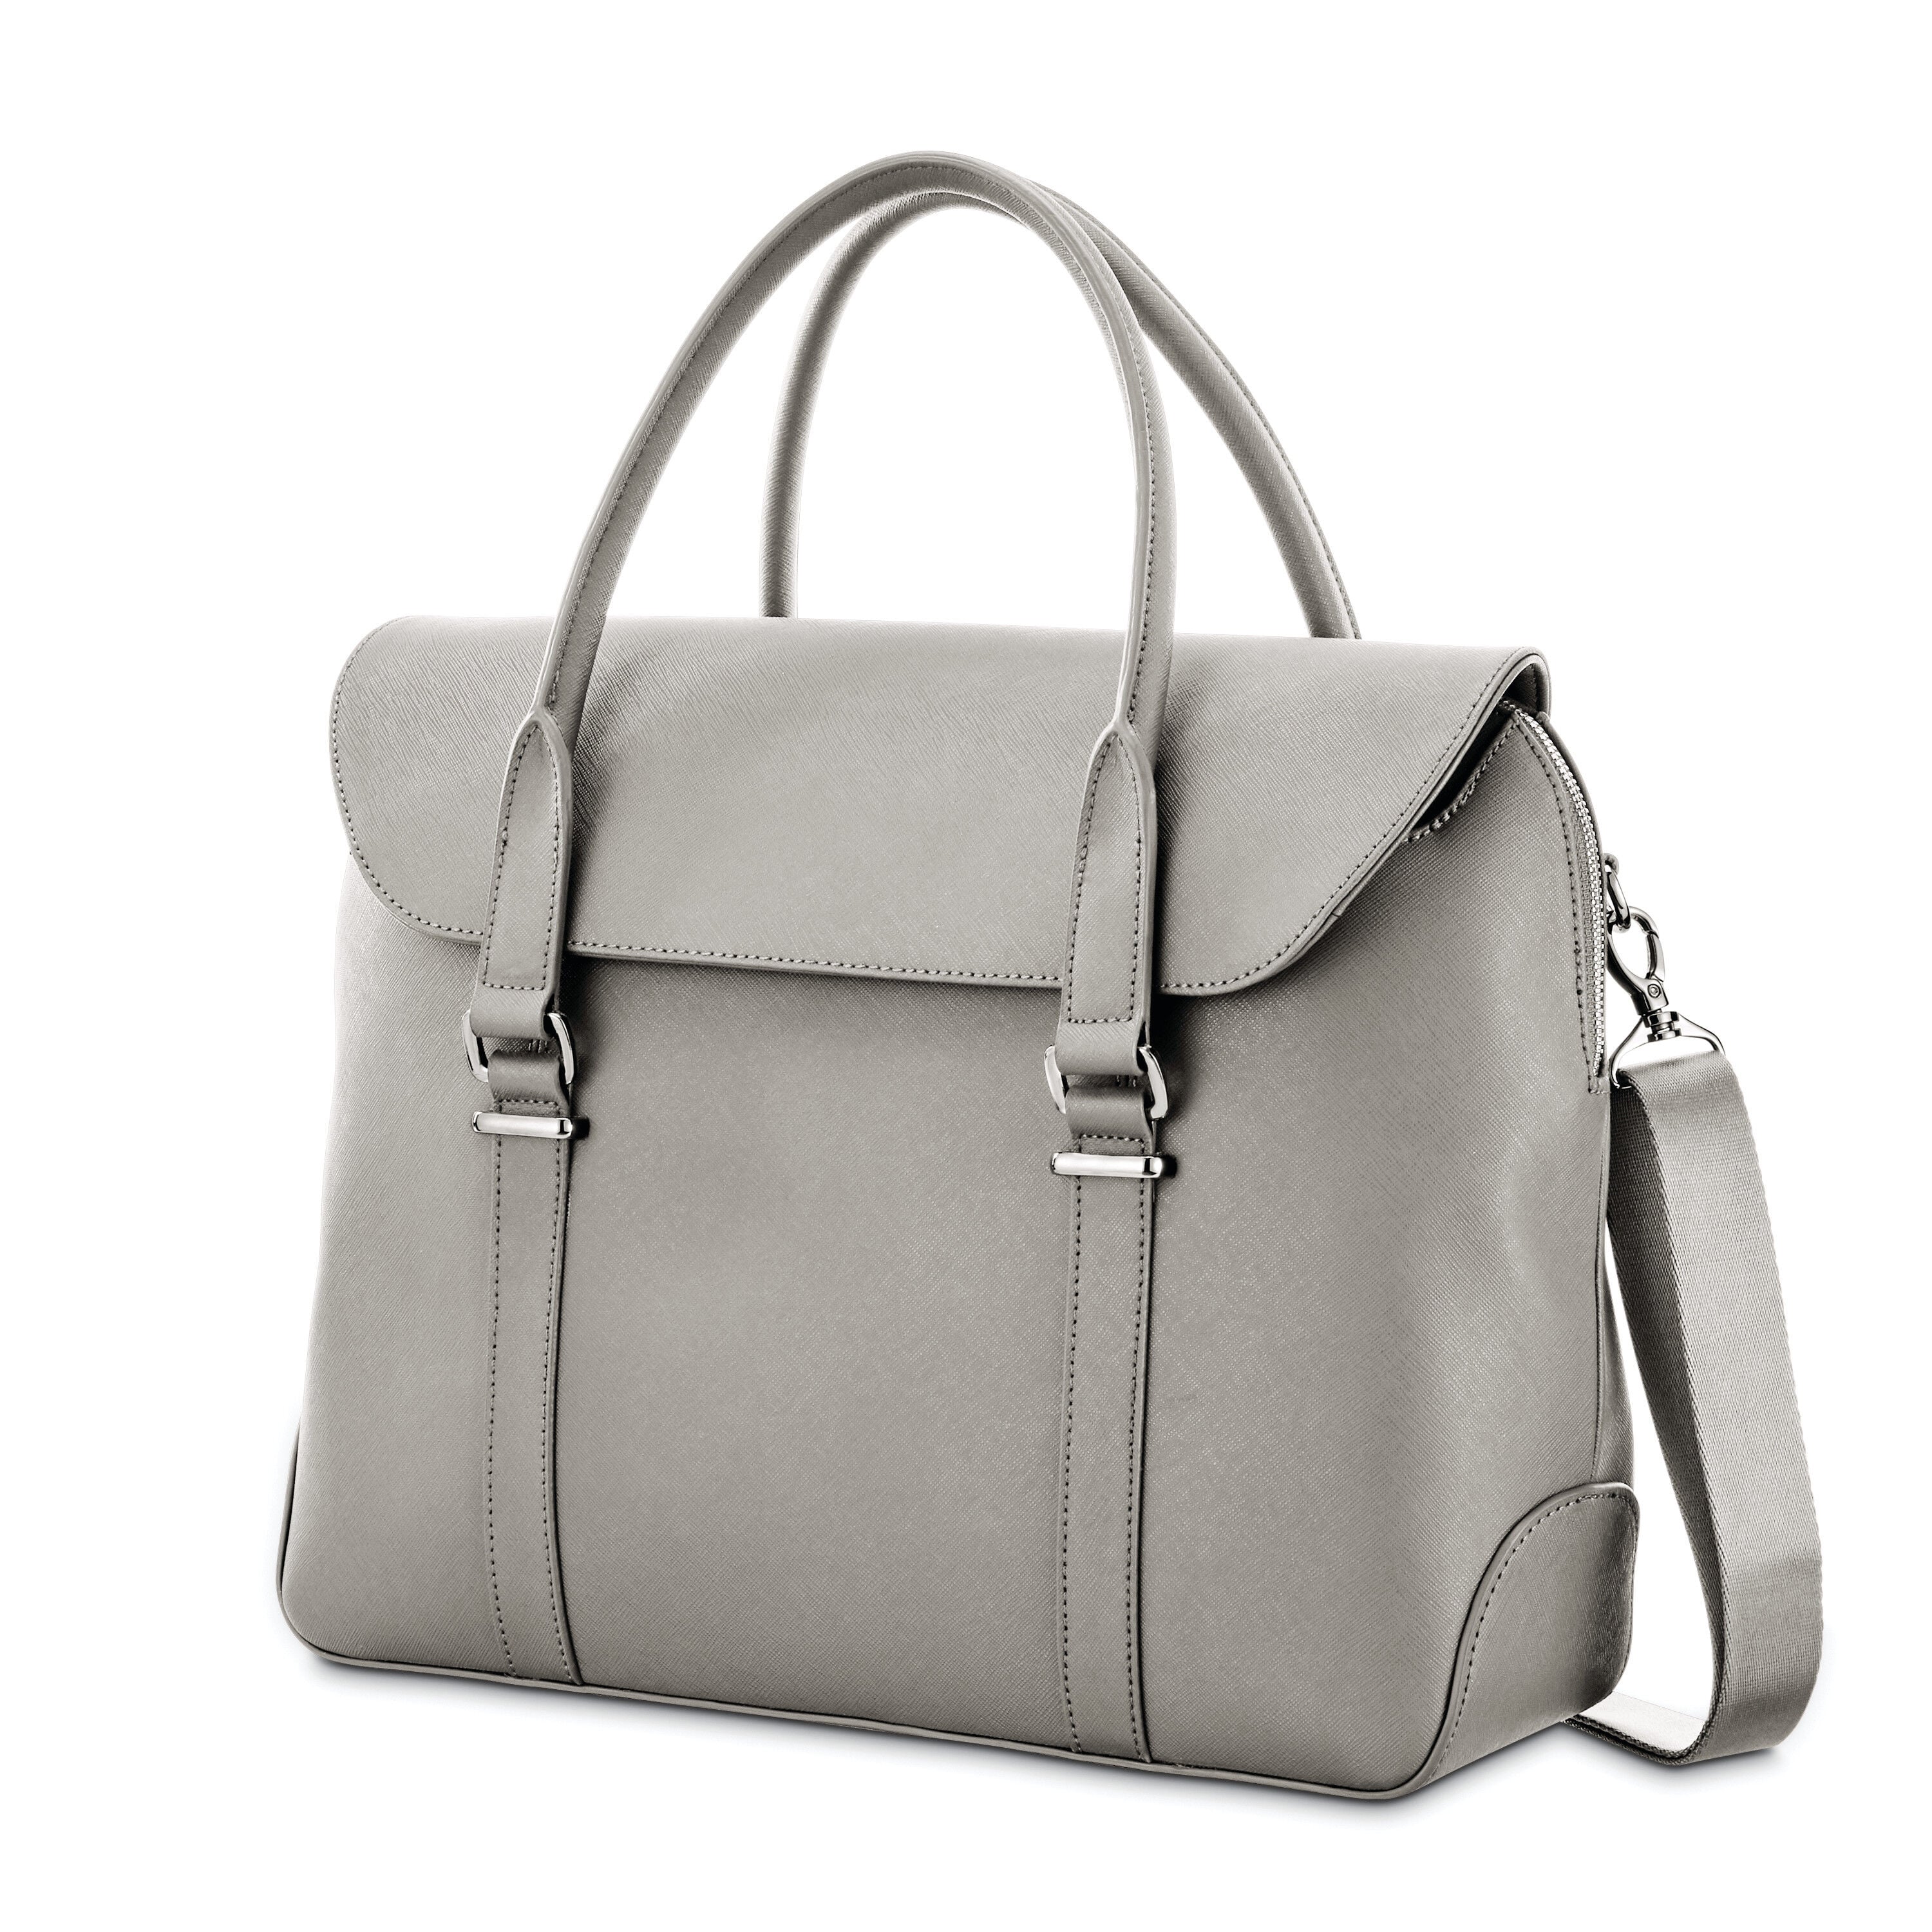 Cuyana Classic Structured Leather Tote Bag Review - Mademoiselle